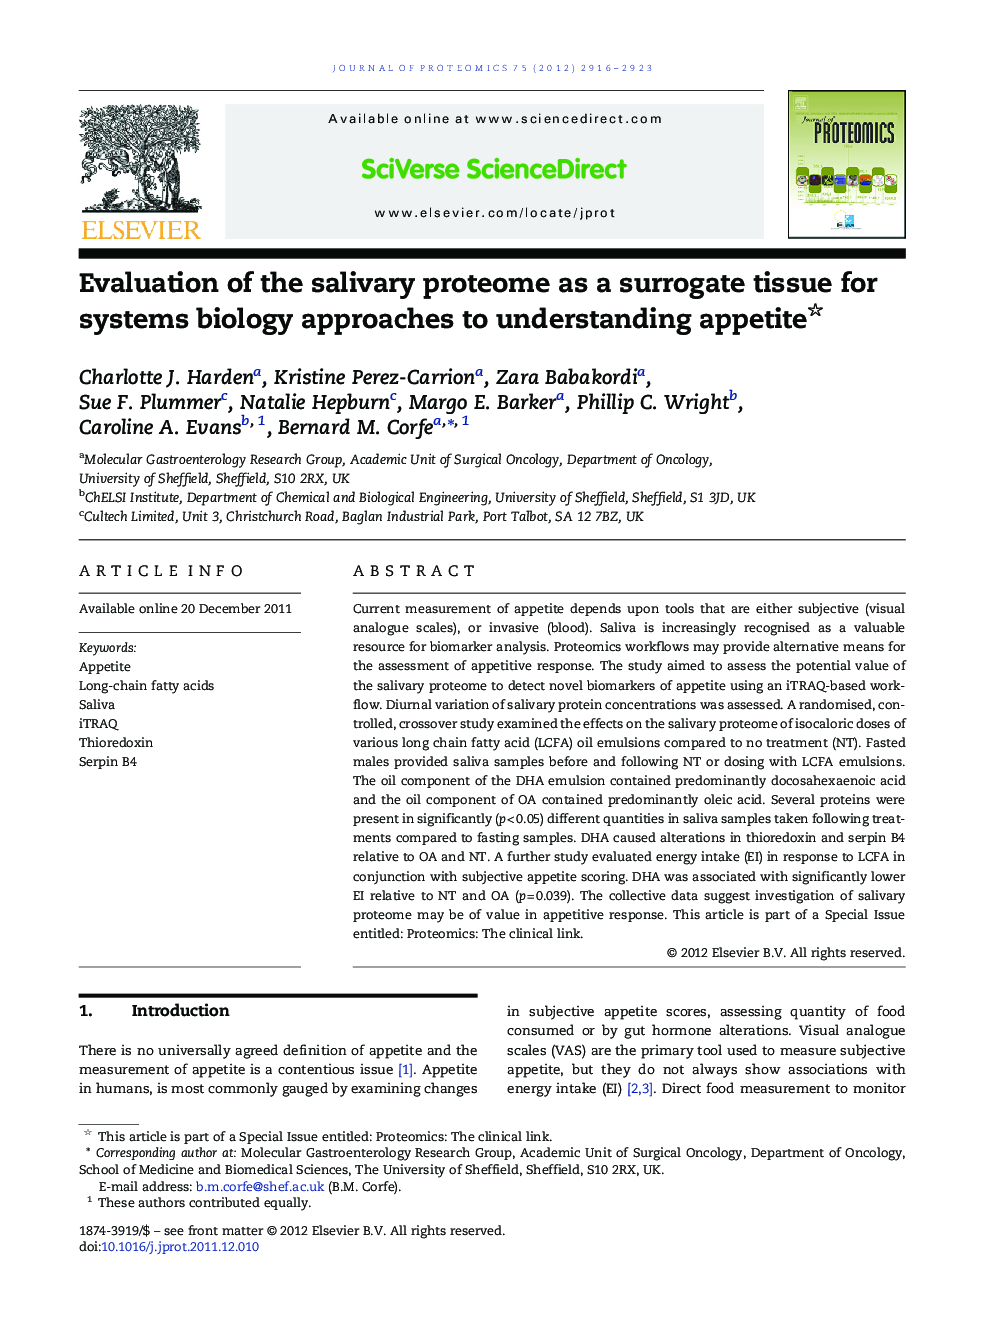 Evaluation of the salivary proteome as a surrogate tissue for systems biology approaches to understanding appetite 